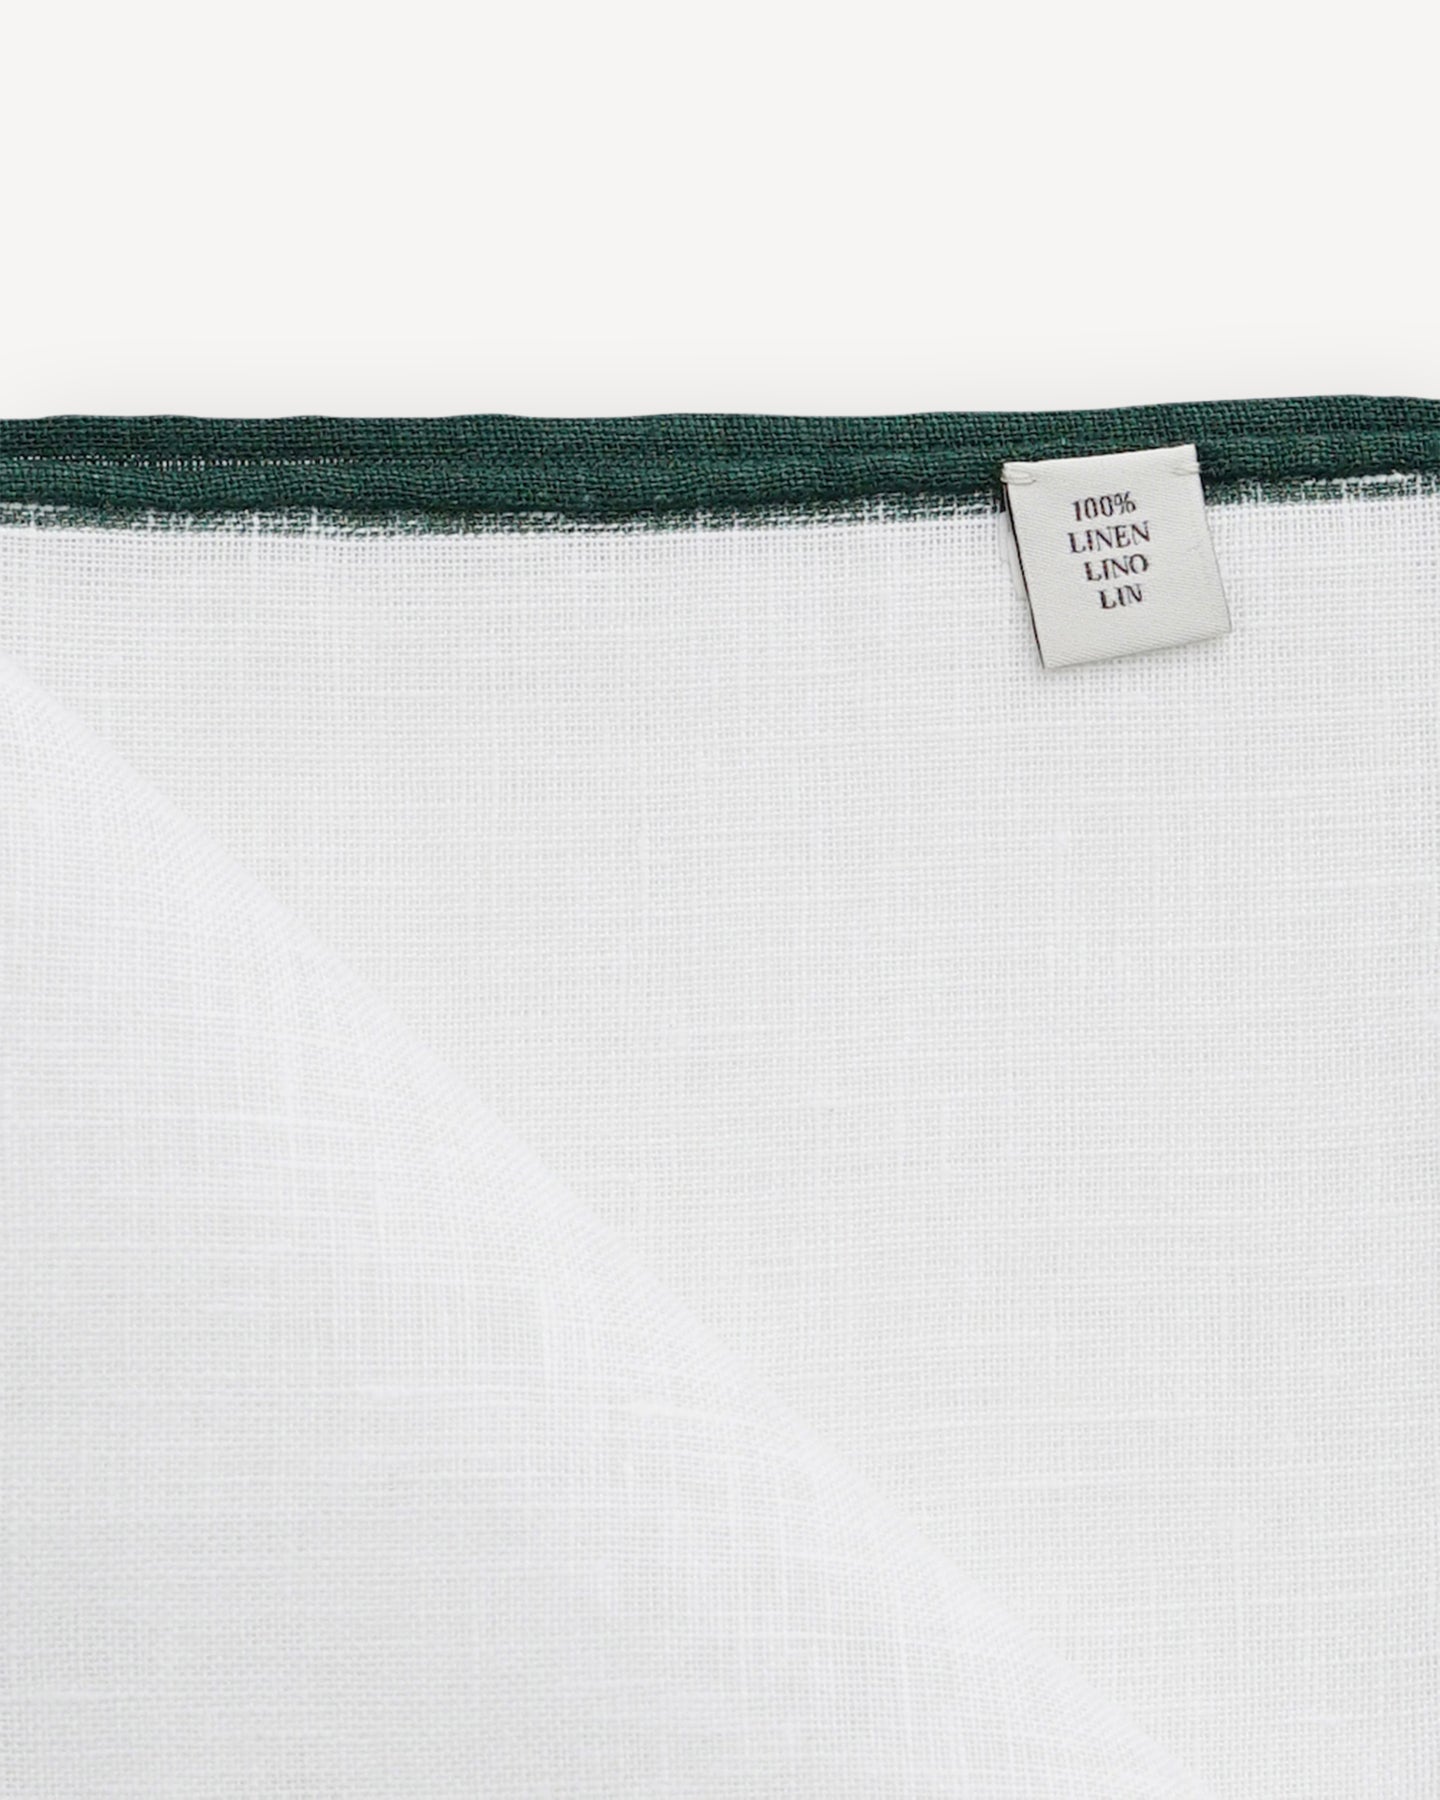 White linen pocket square with green shoestring